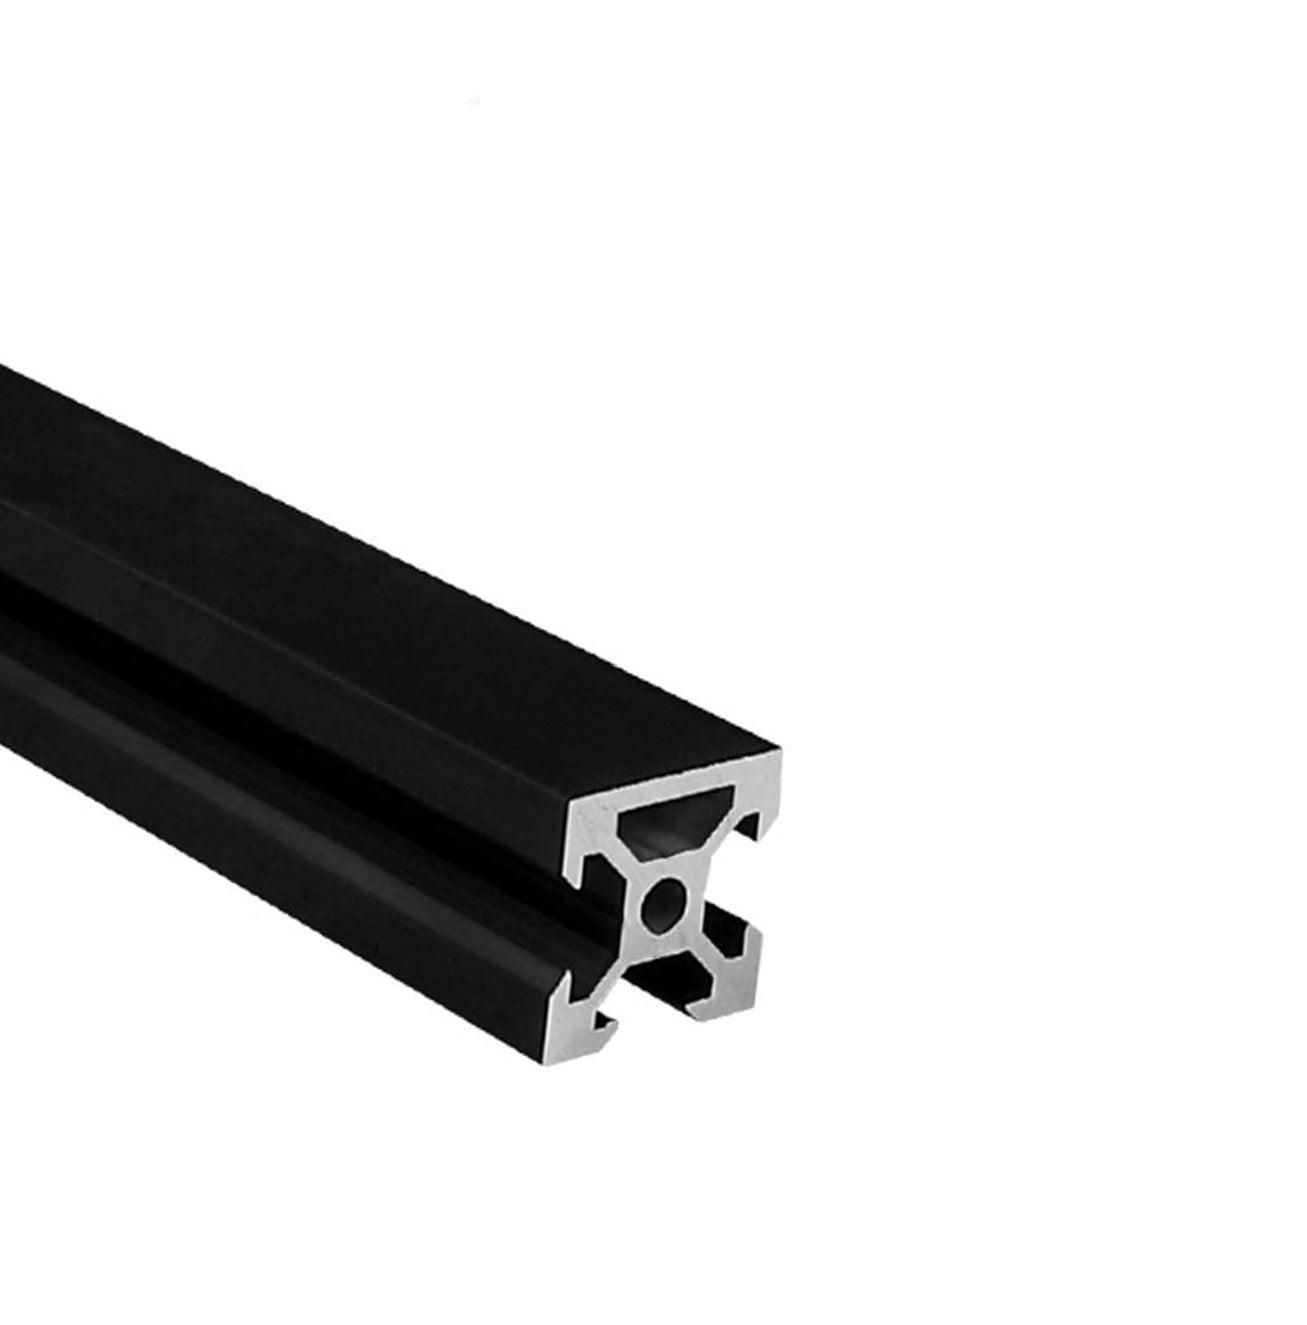 1" x 1" Black Smooth Tri-Slotted Aluminum Extrusion - 1ft Bar - Forces Inc